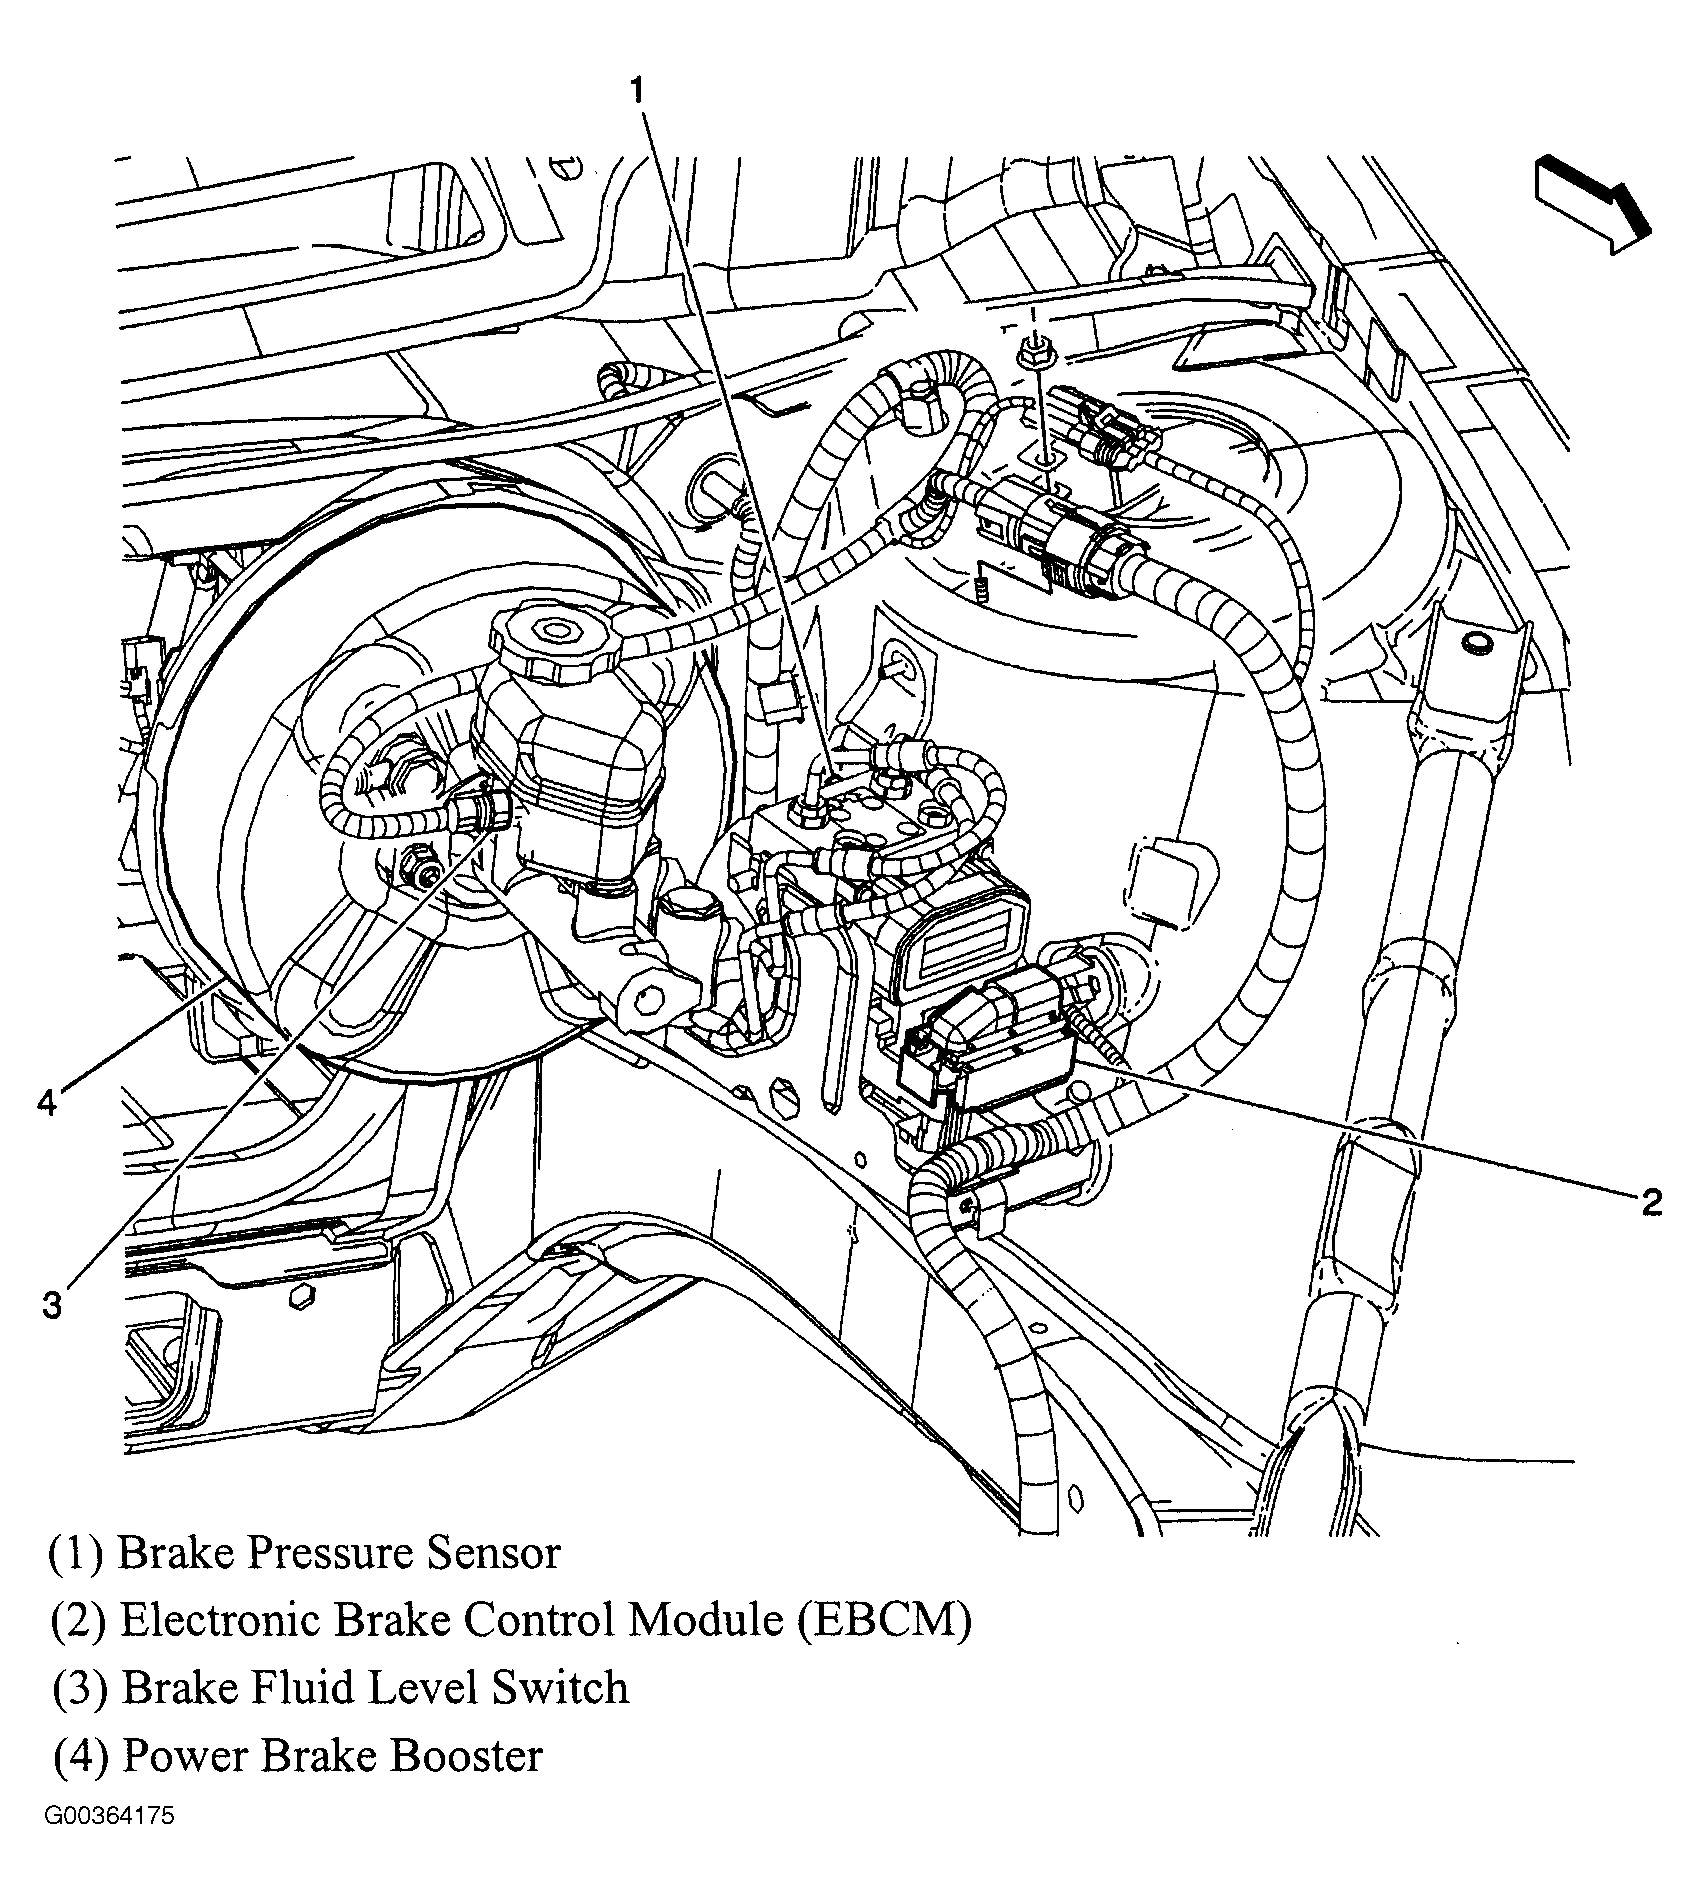 Buick Allure CXL 2008 - Component Locations -  Left Rear Of Engine Compartment